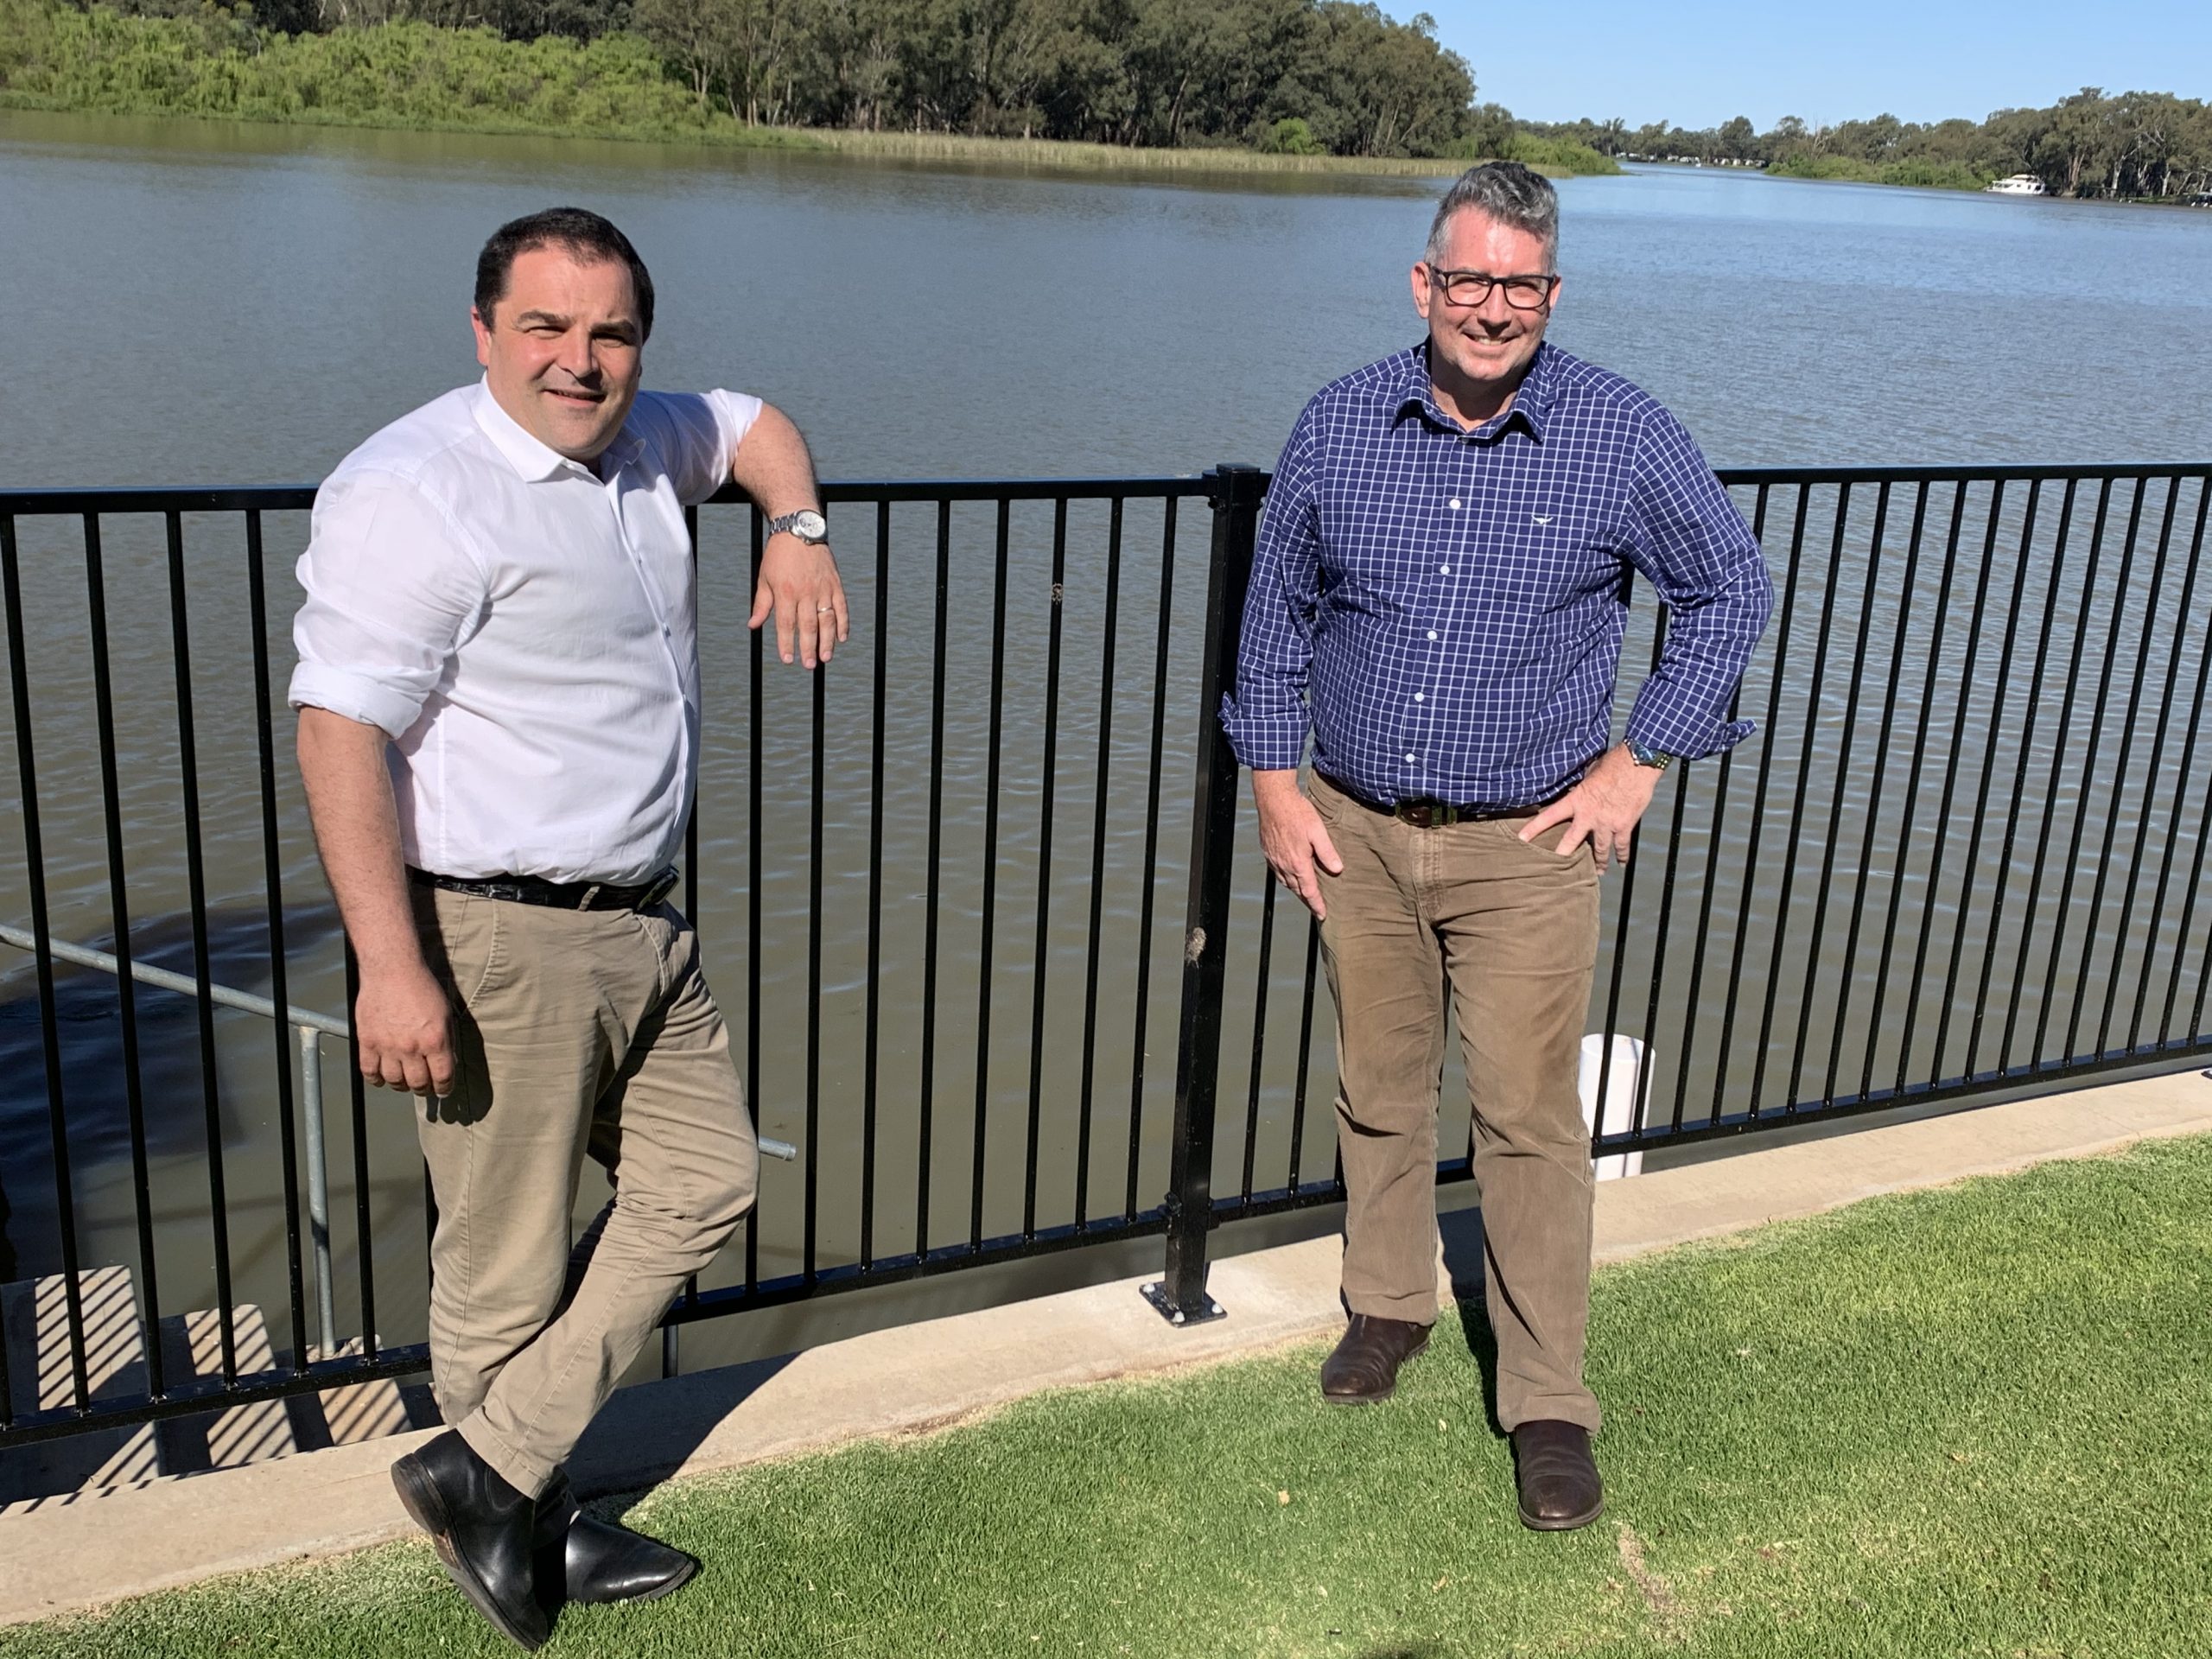 RIVERLAND COMMUNITY GATHER TO ADVANCE LOCAL WATER PRIORITIES